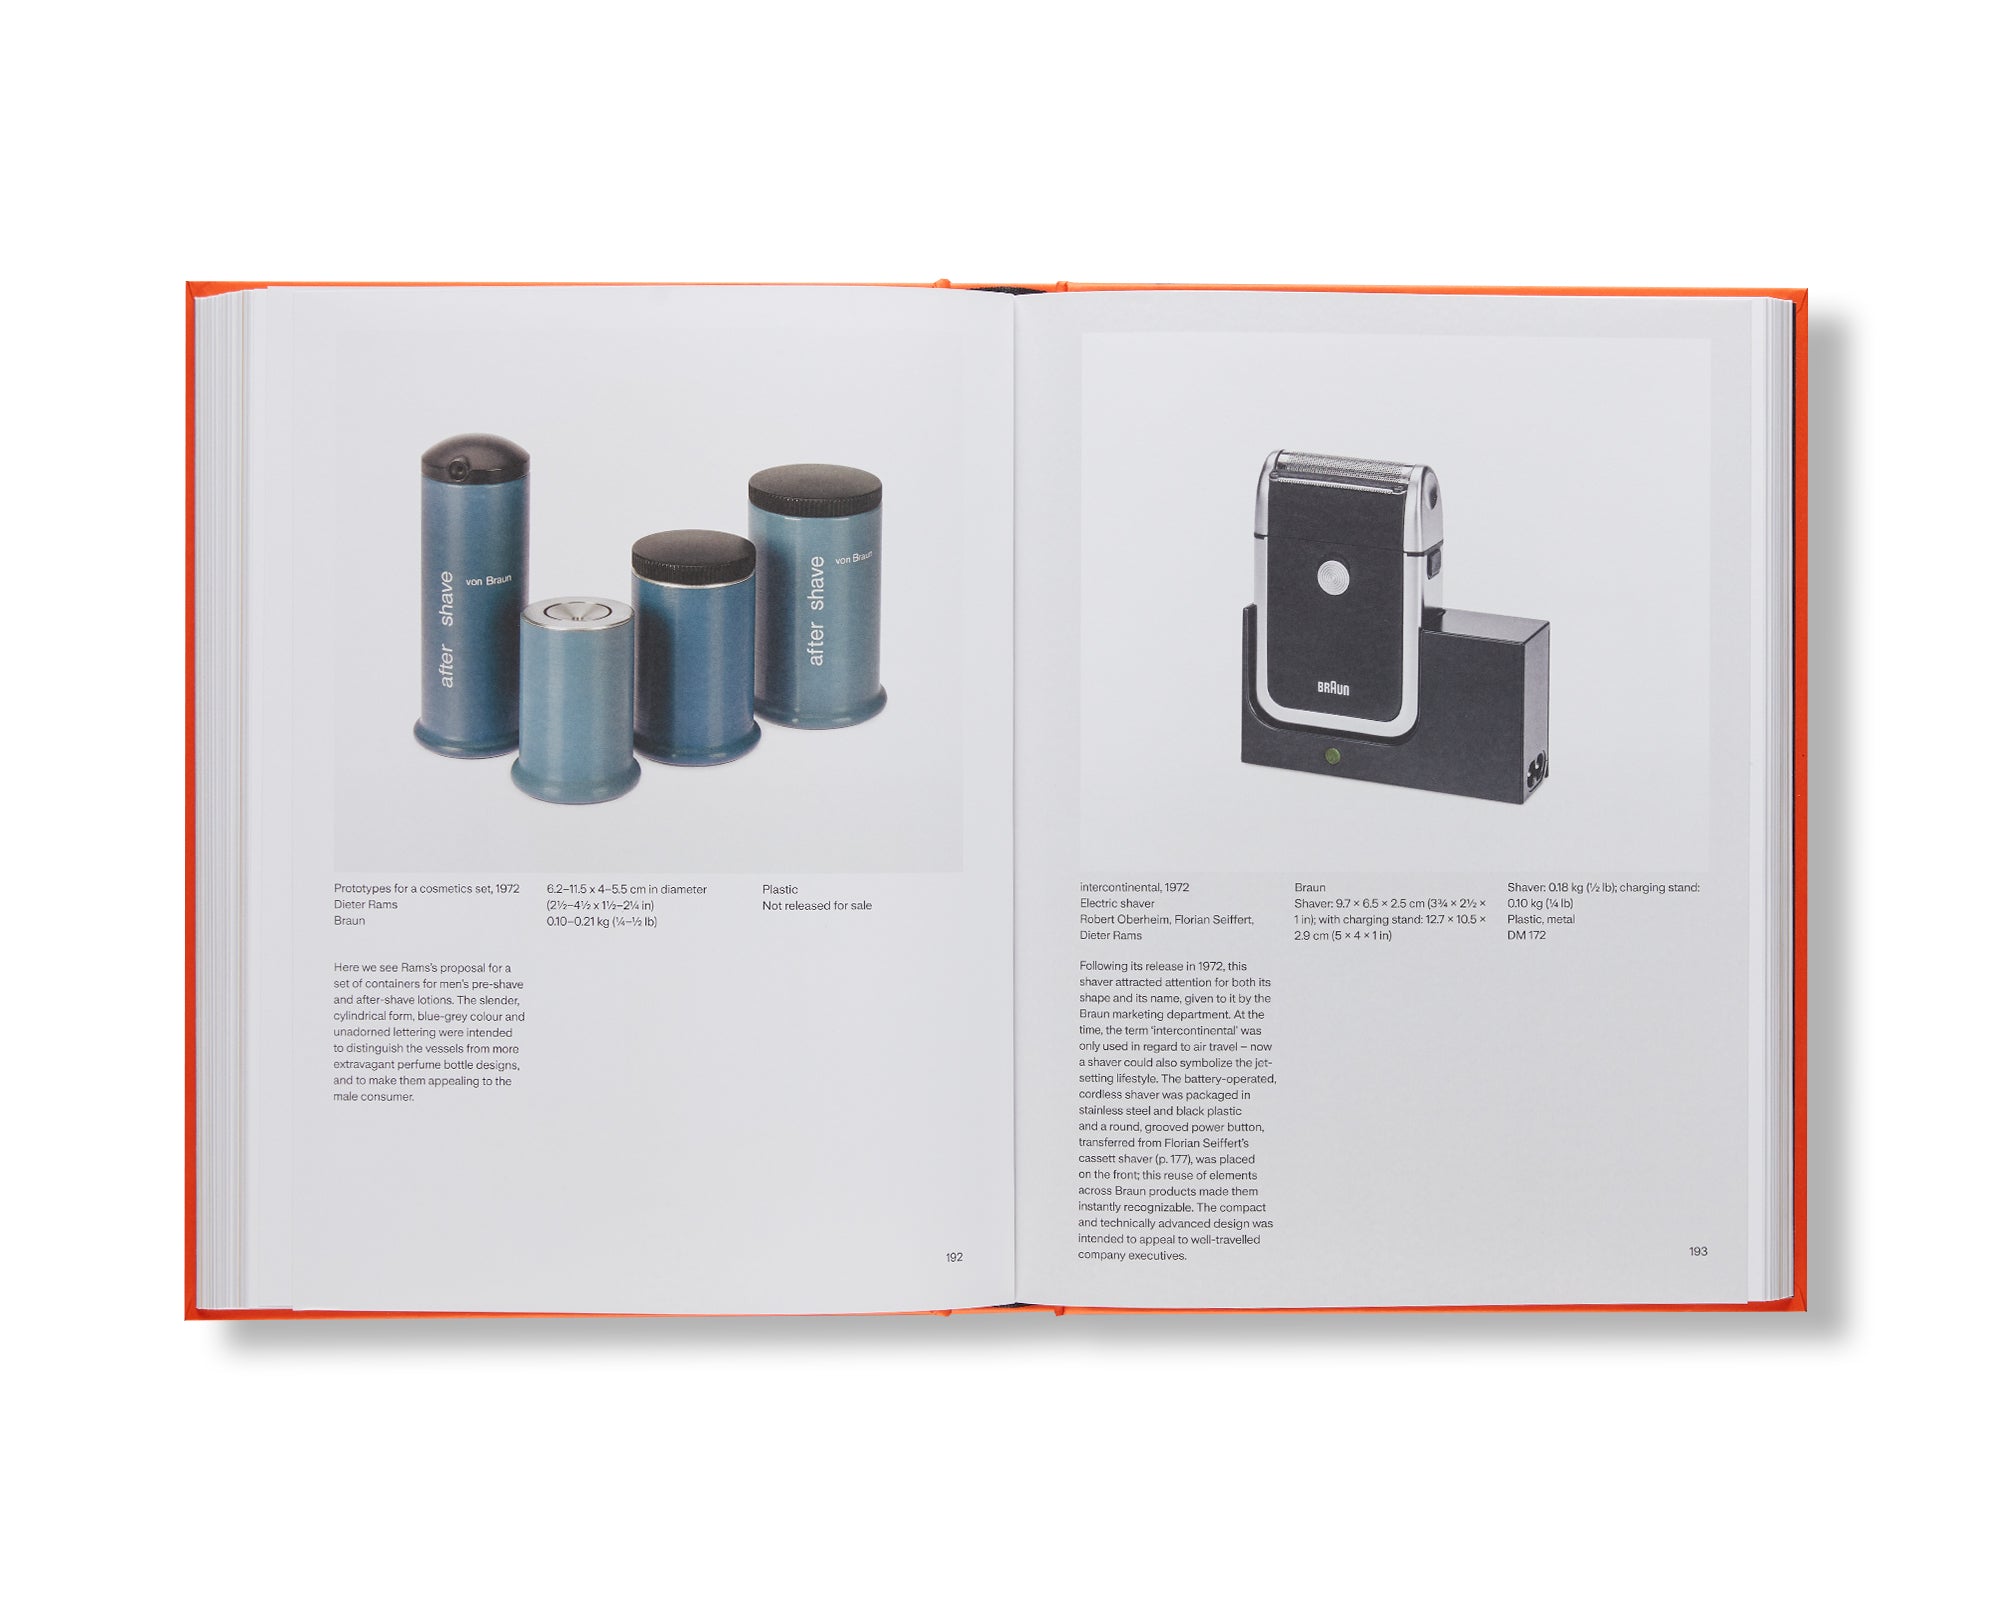 THE COMPLETE WORKS by Dieter Rams